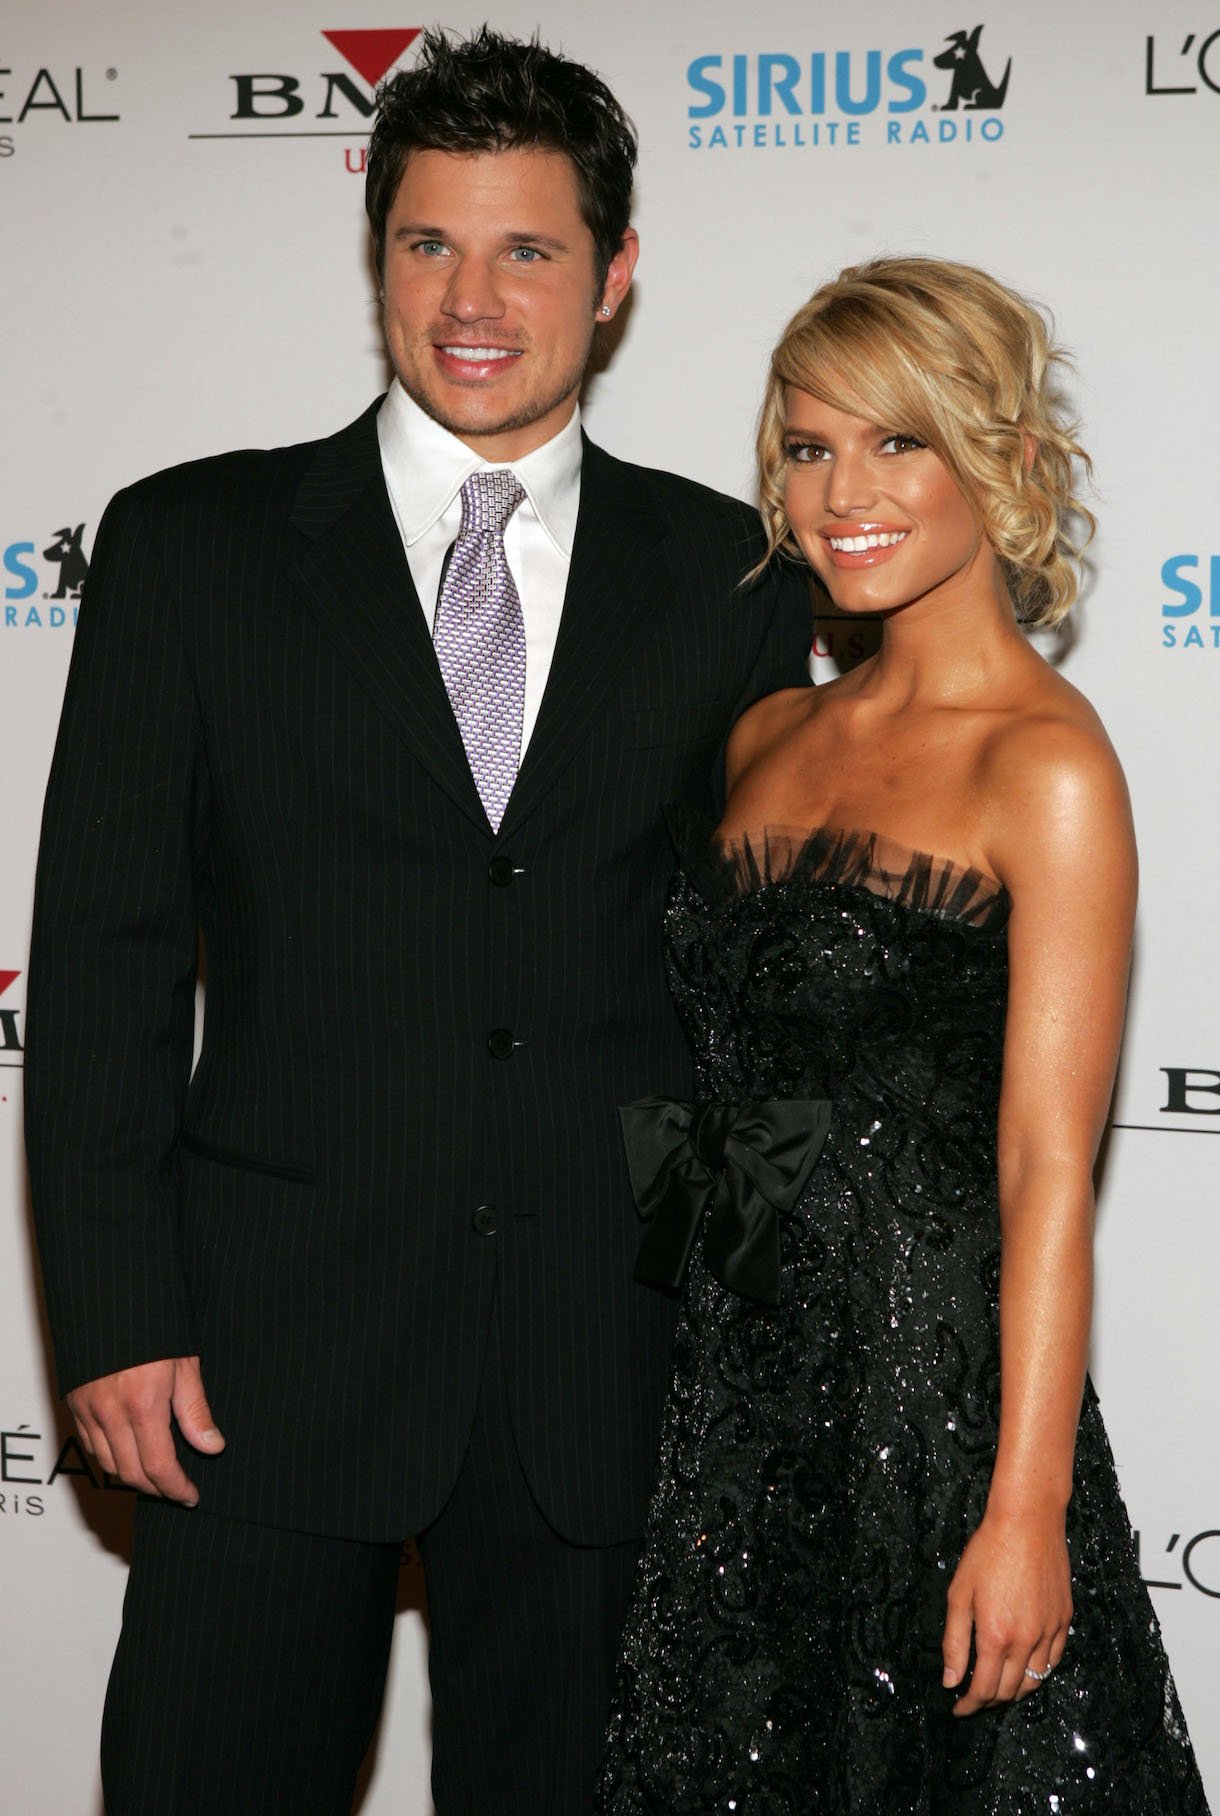 Singers Nick Lachey Jessica Simpson arrive at the Clive Davis Annual Grammy Party at the Beverly Hills Hotel on February 12, 2005